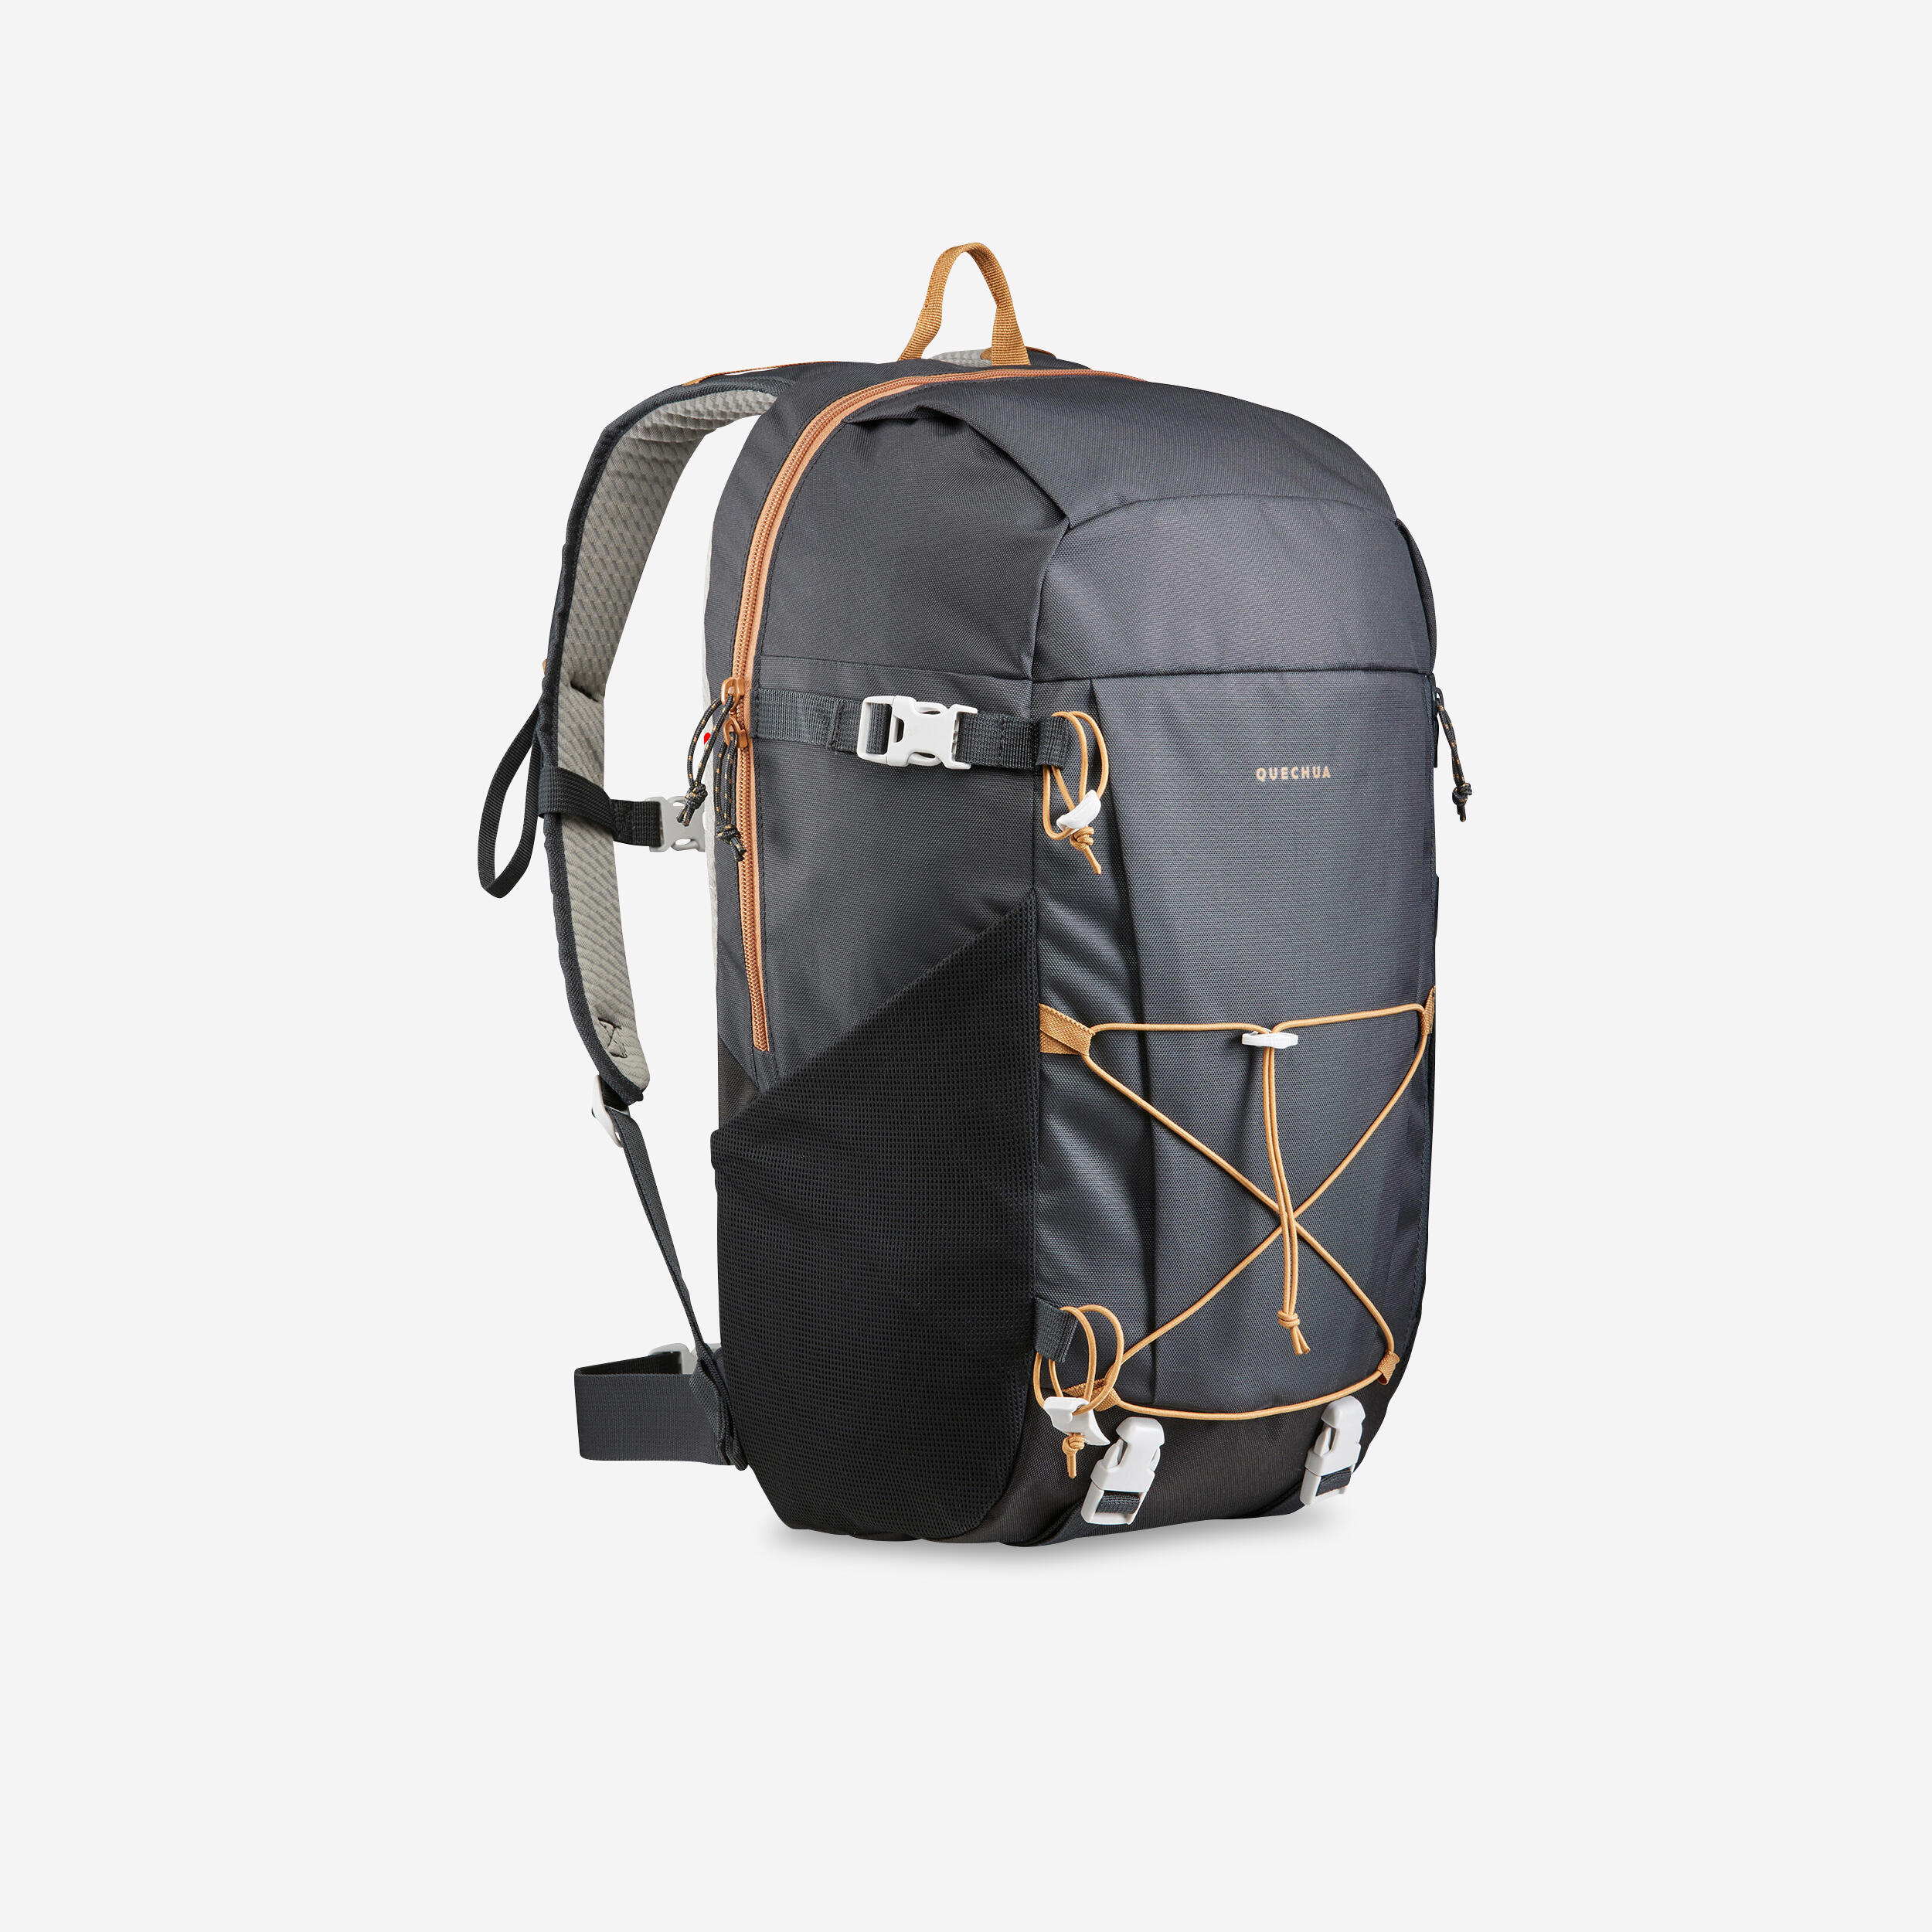 QUECHUA Hiking backpack 30L - NH Arpenaz 100